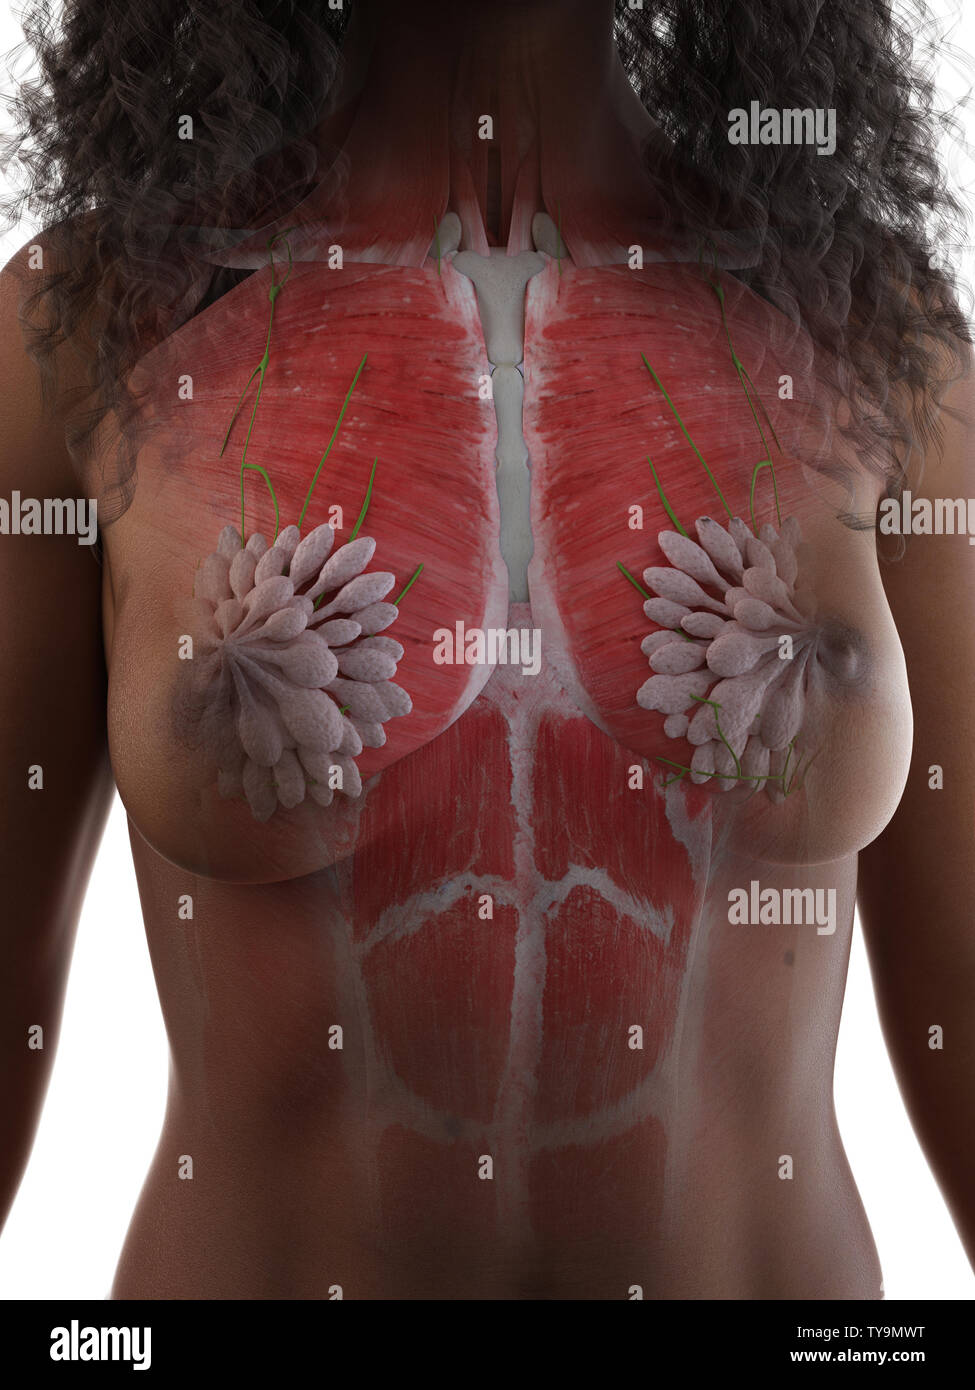 3d rendered medically accurate illustration of a females back muscles Stock  Photo - Alamy